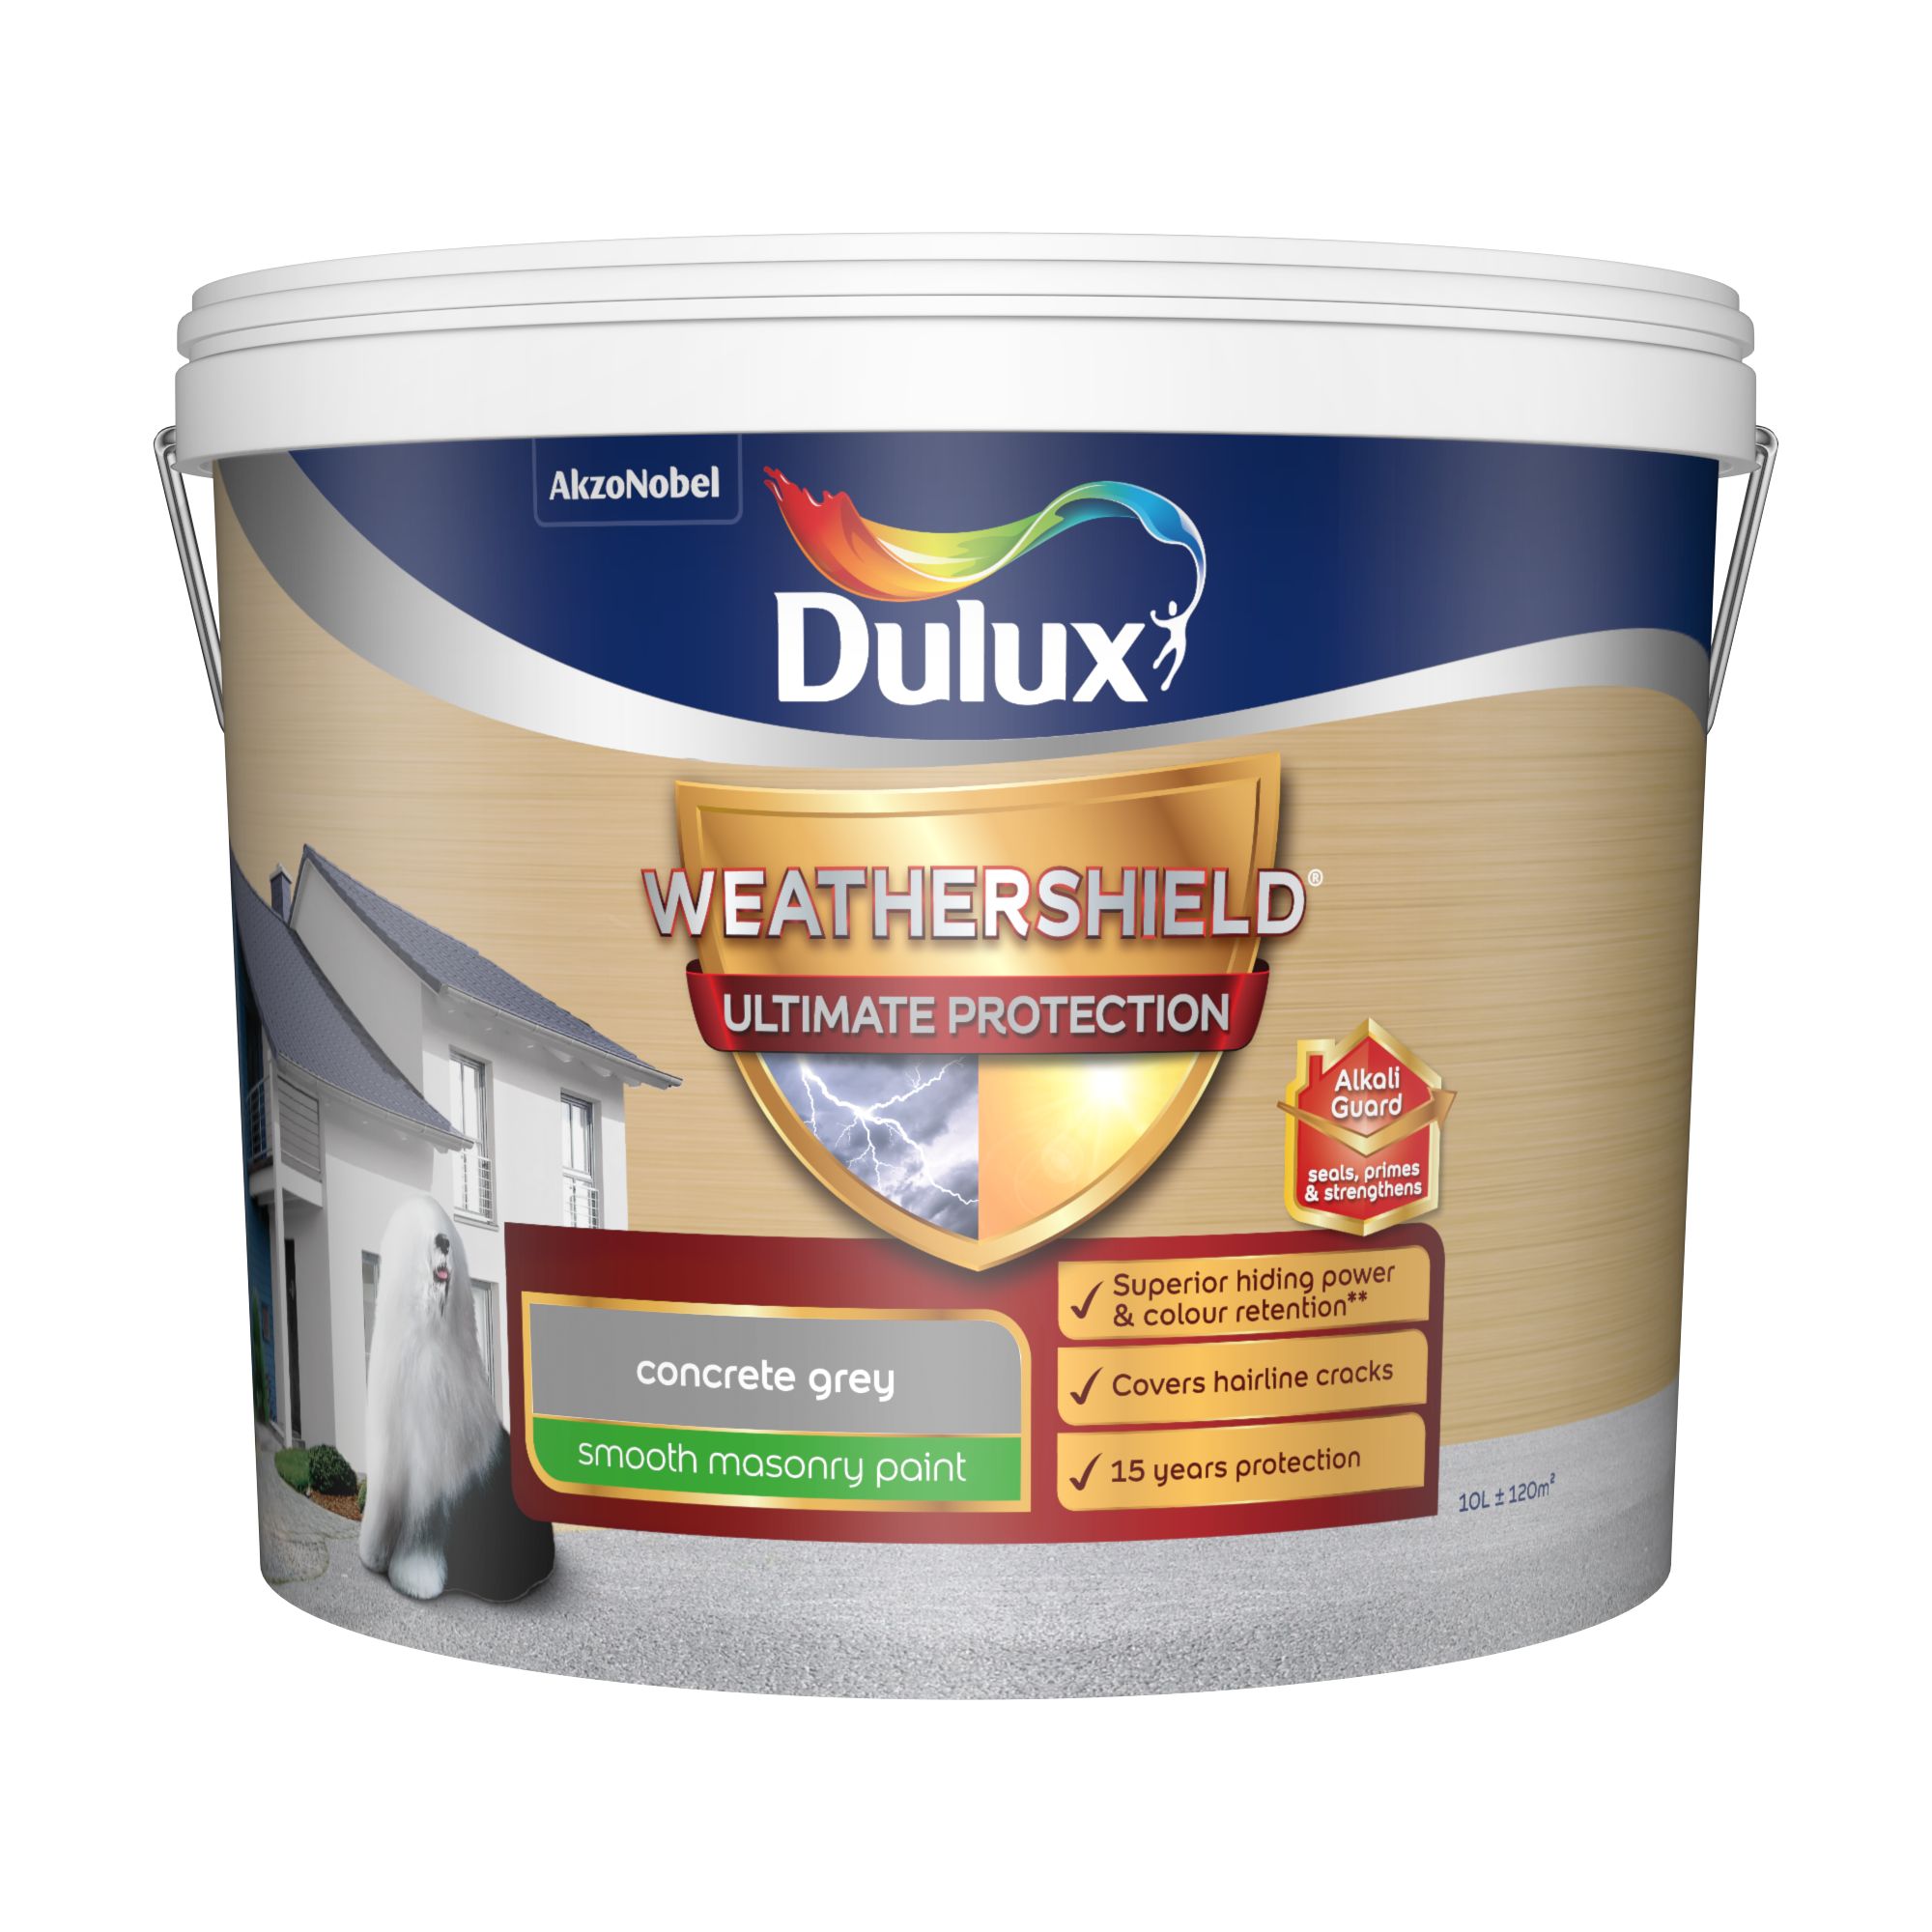  Dulux  Weathershield  ultimate protection  Concrete grey 